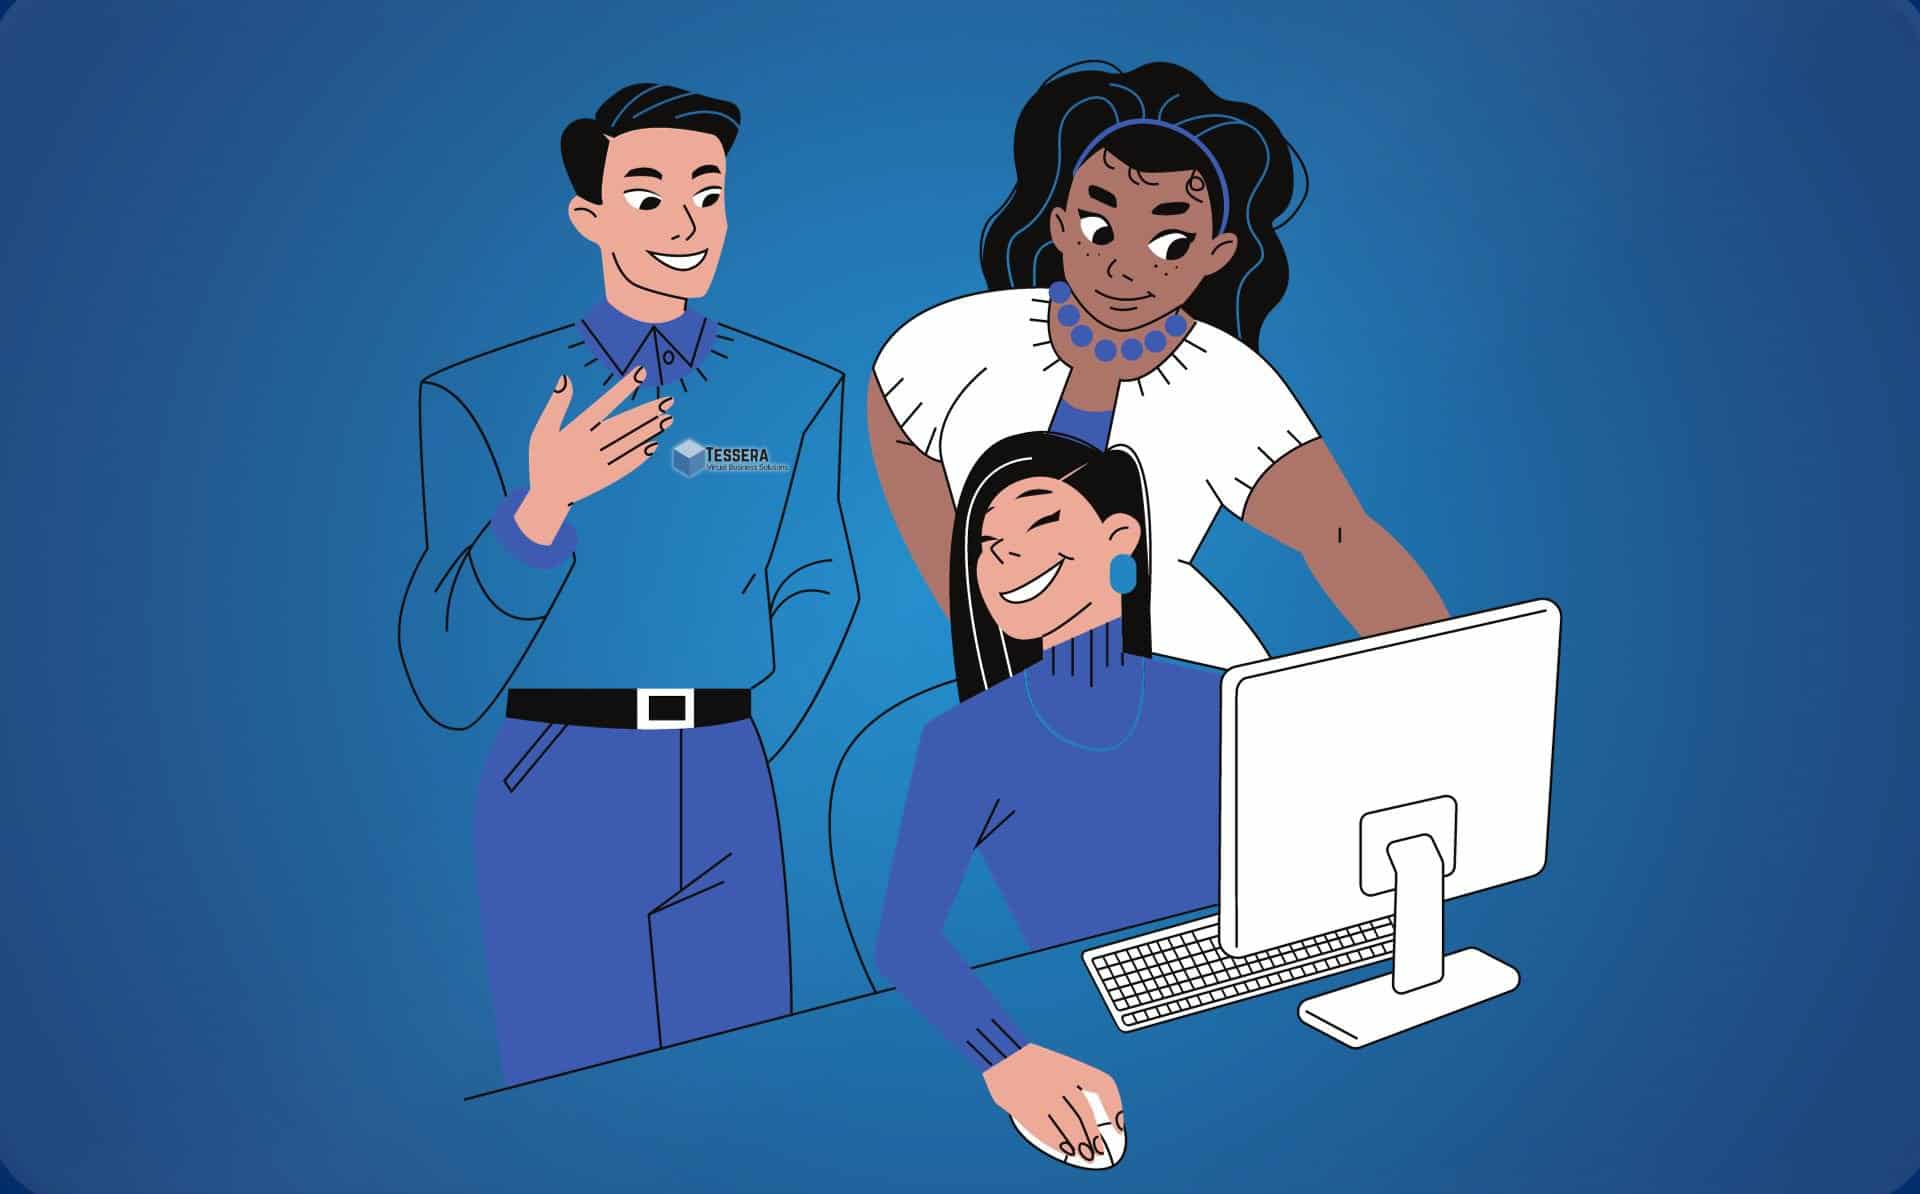 office workers on computer smiling during their onboarding process